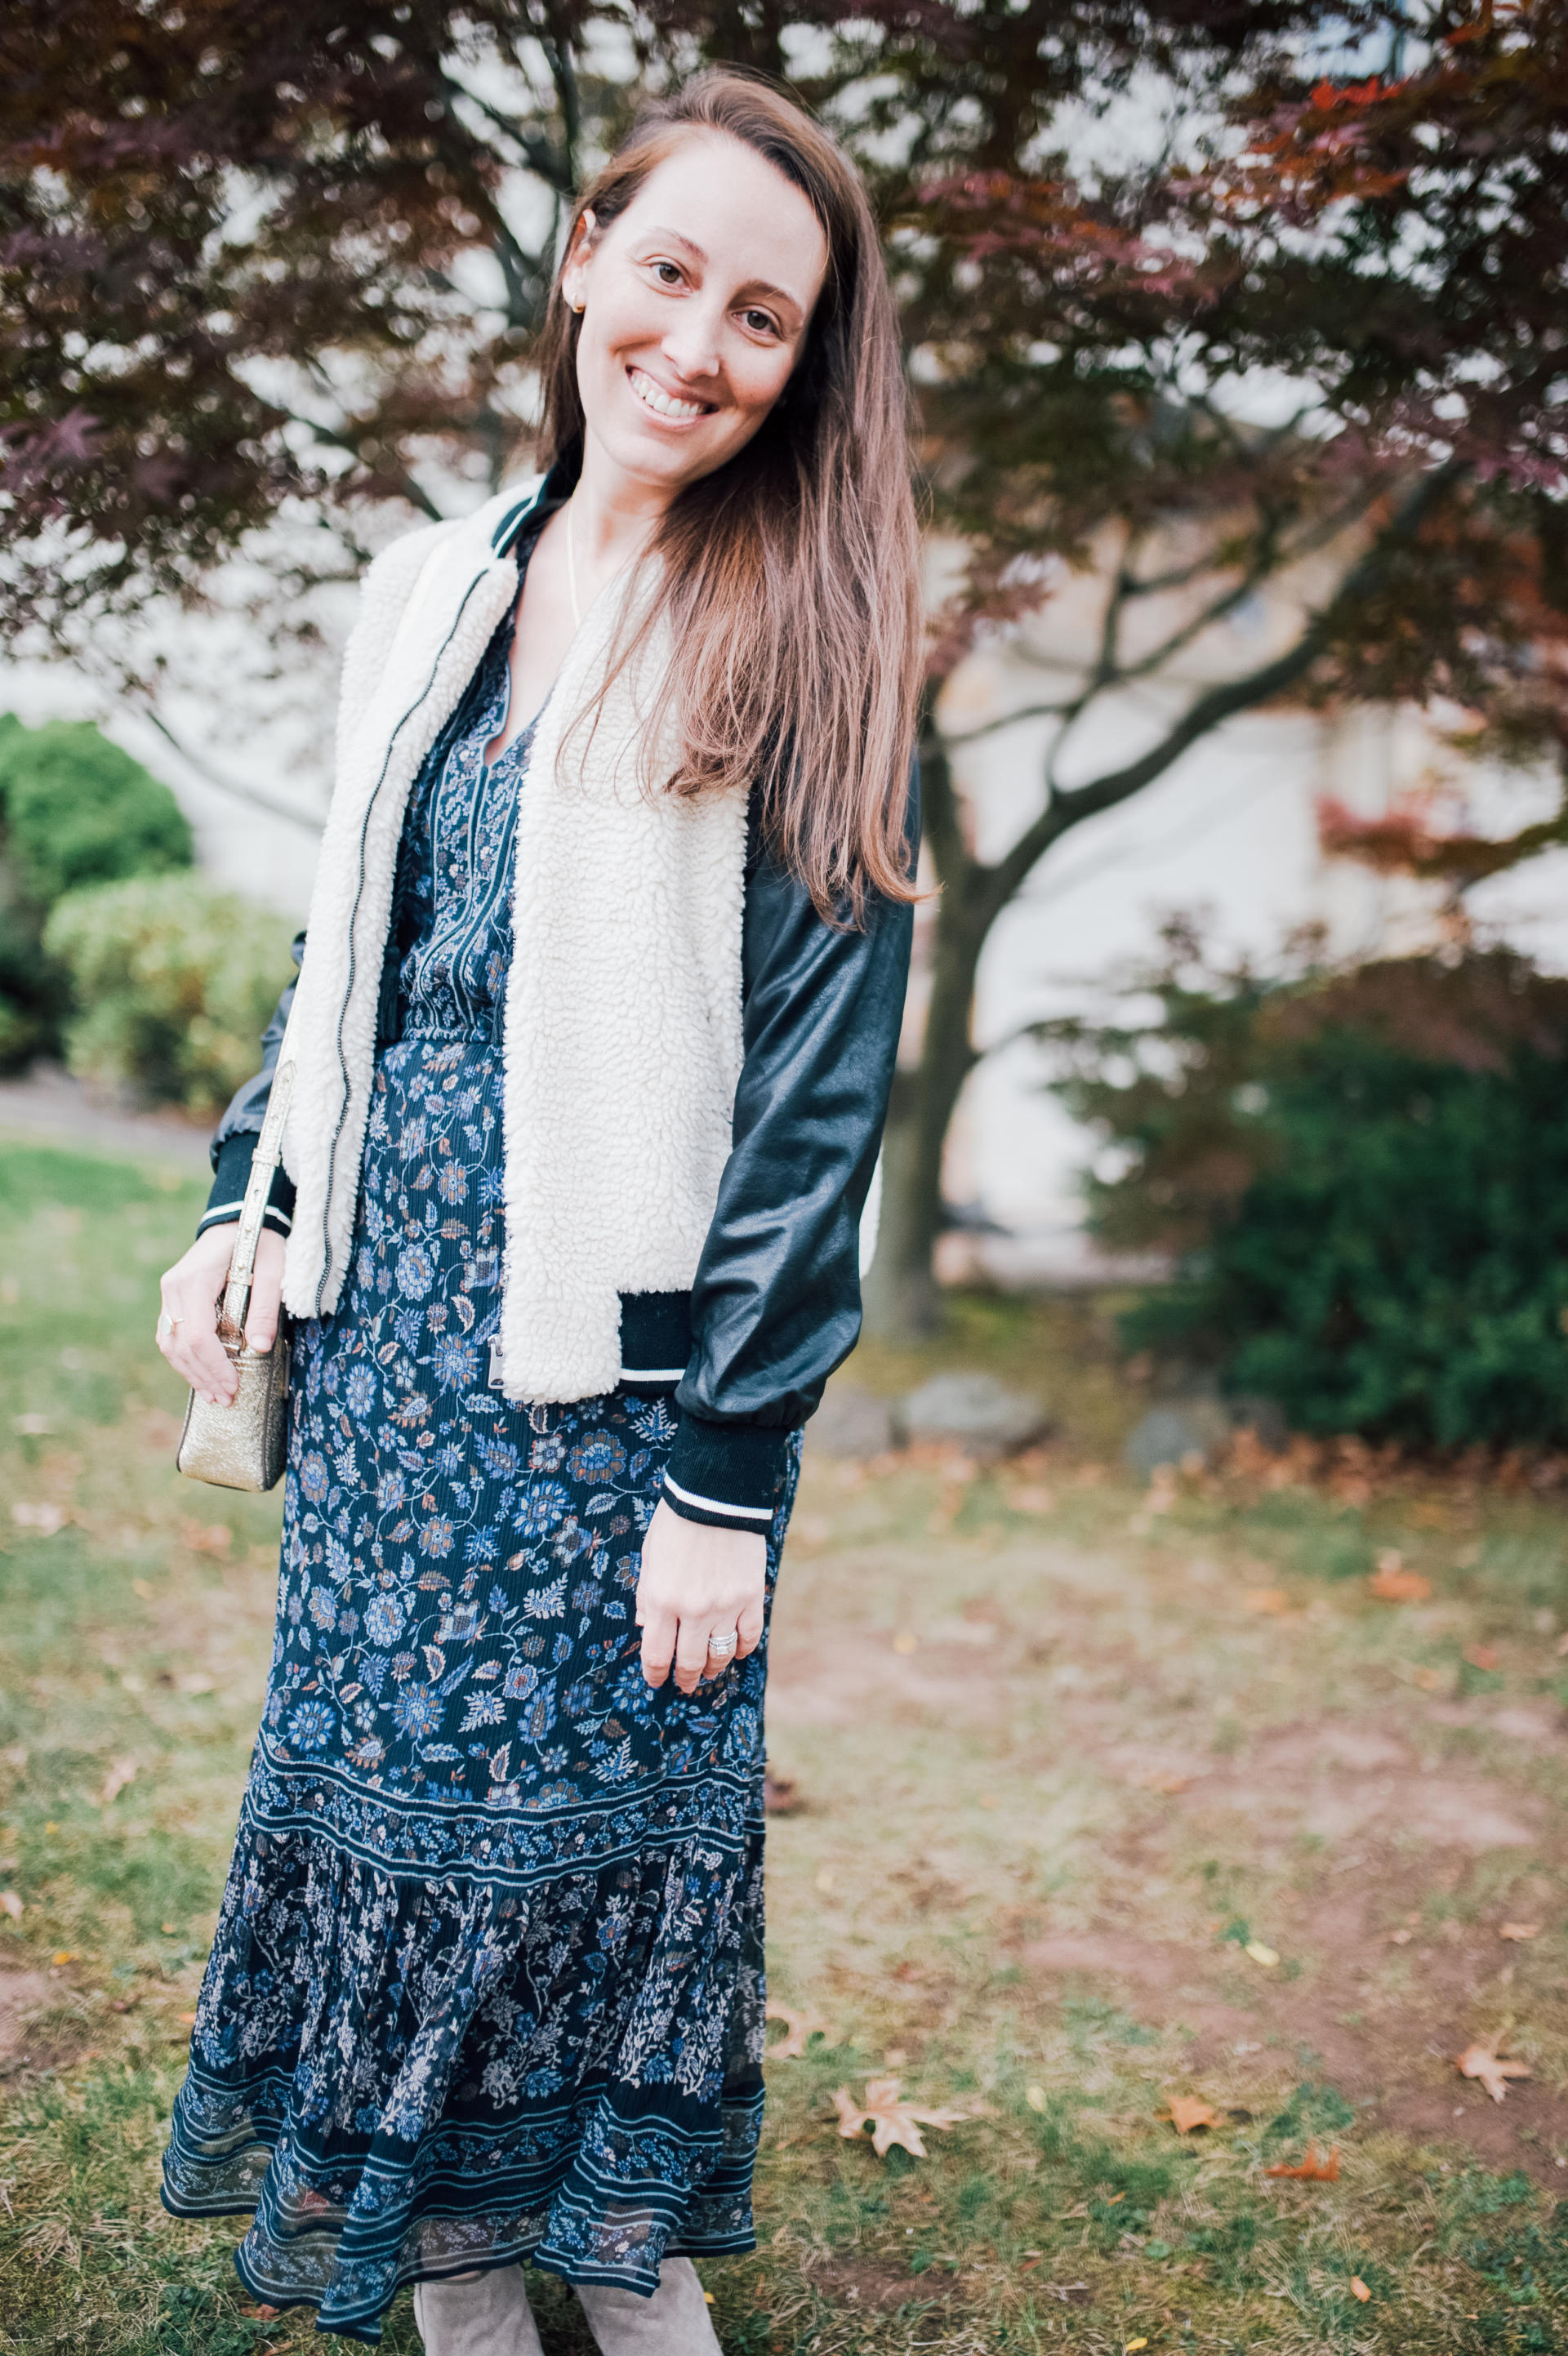 All Smiles: Favorite Fall Fashion Outfit by popular New Jersey fashion blogger What's For Dinner Esq.